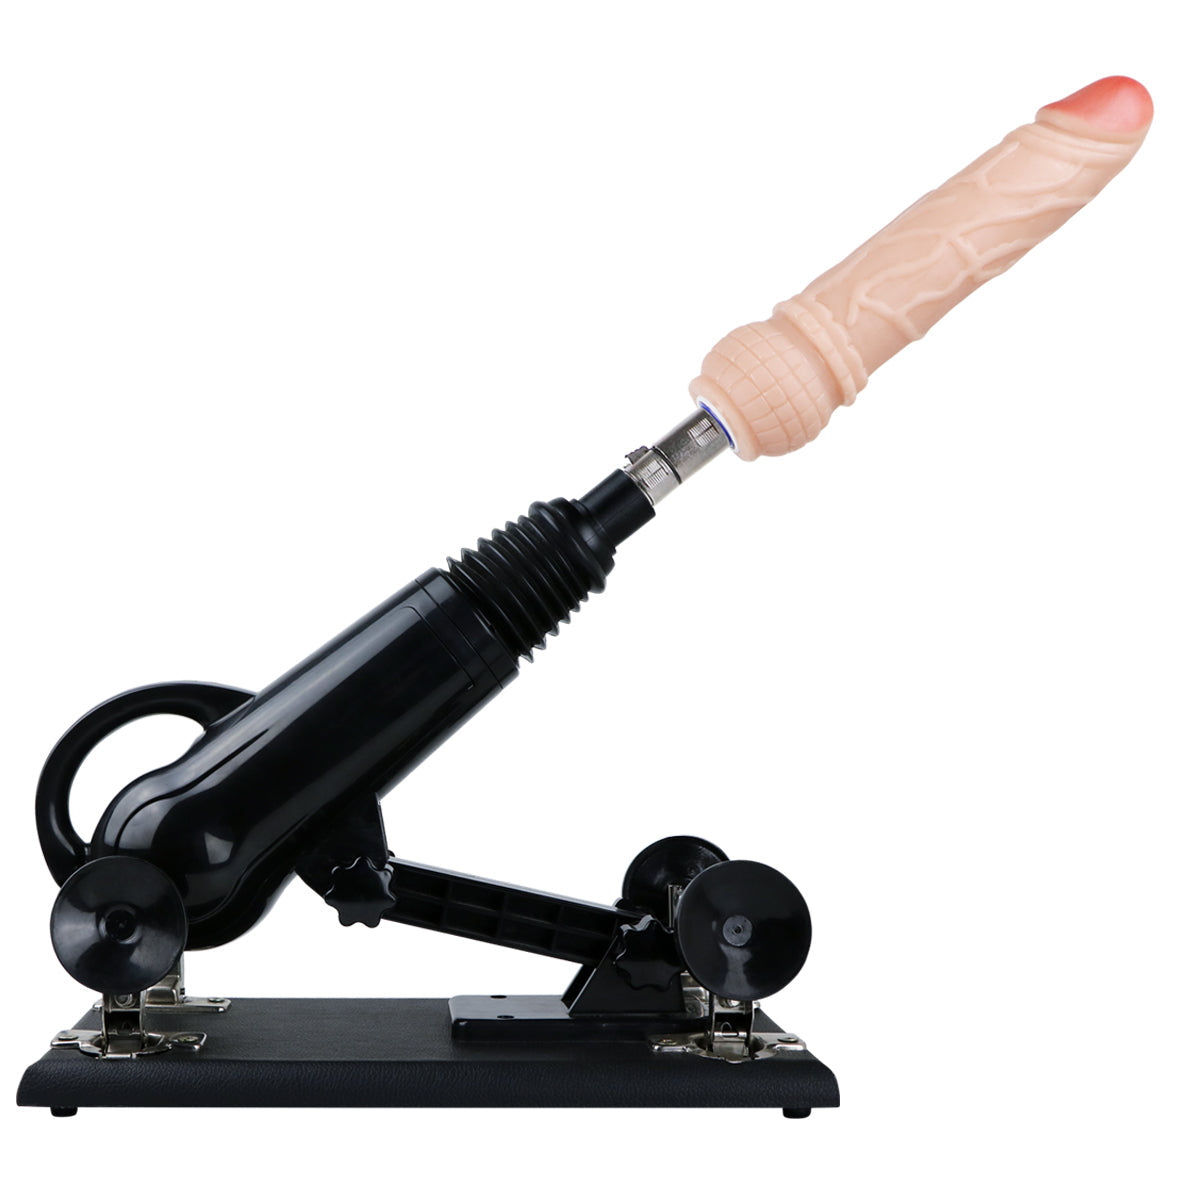 Lace & Leather's Deluxe Thrusting Machine